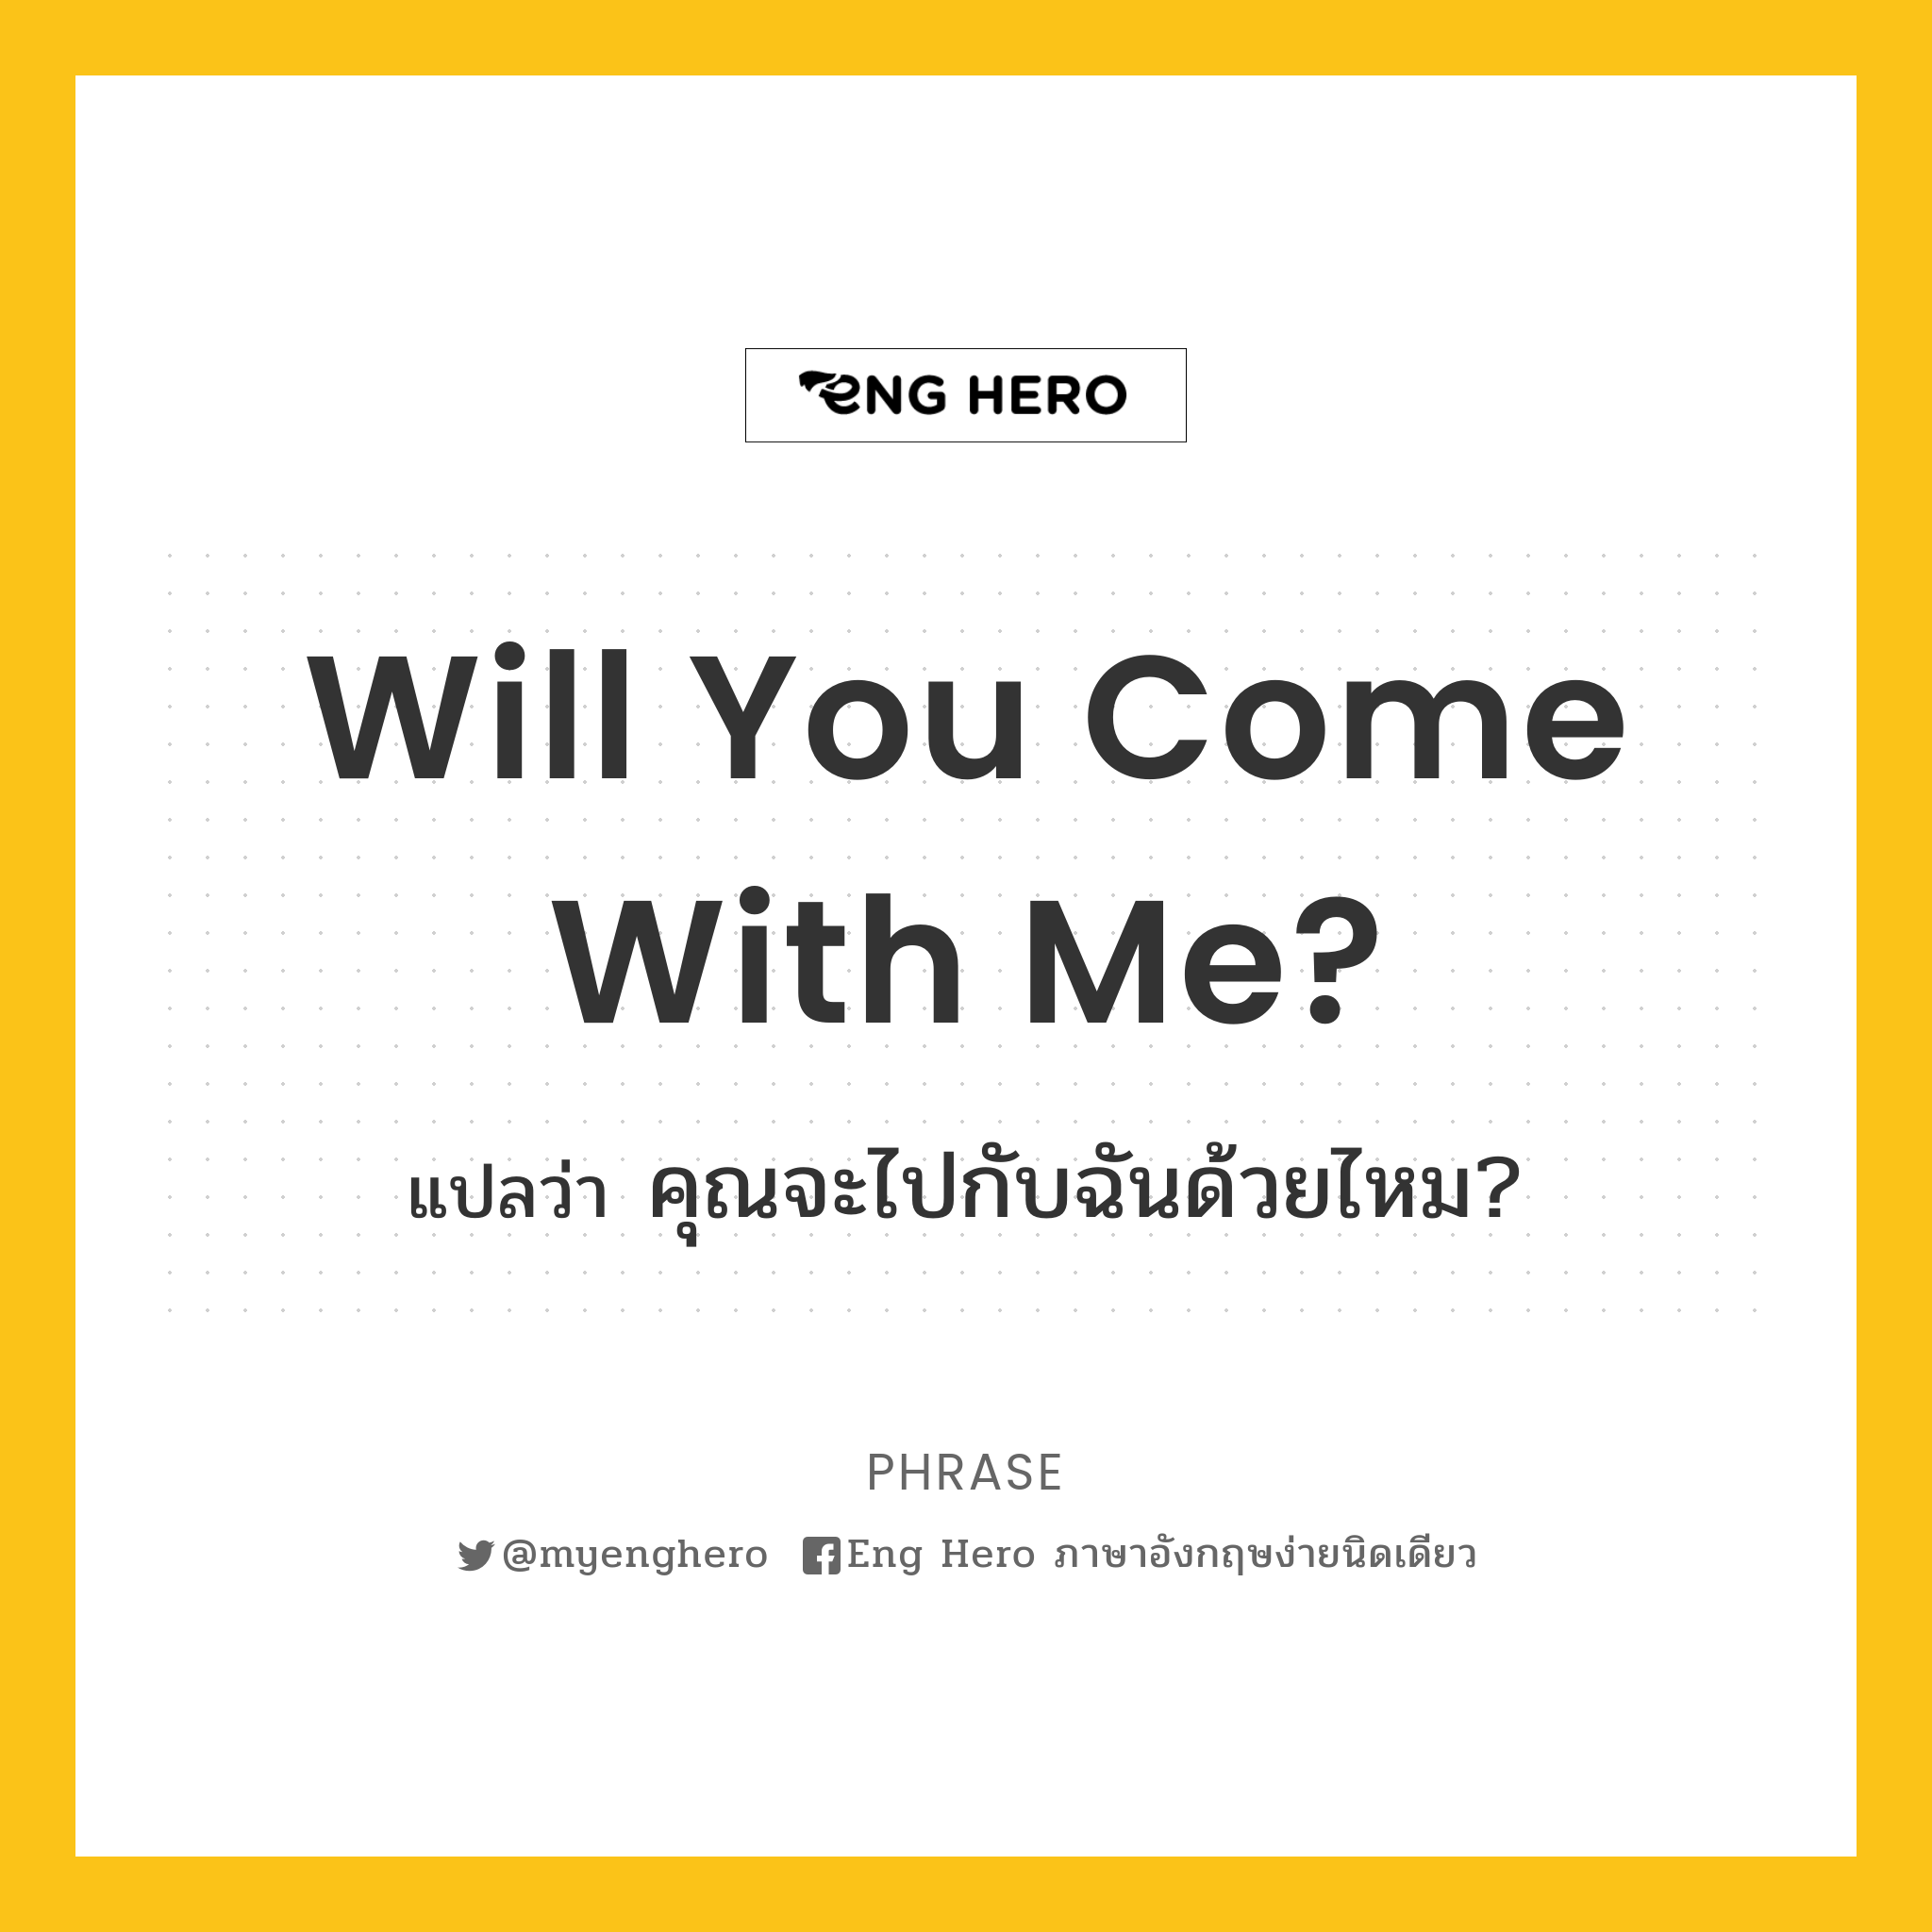 Will you come with me?